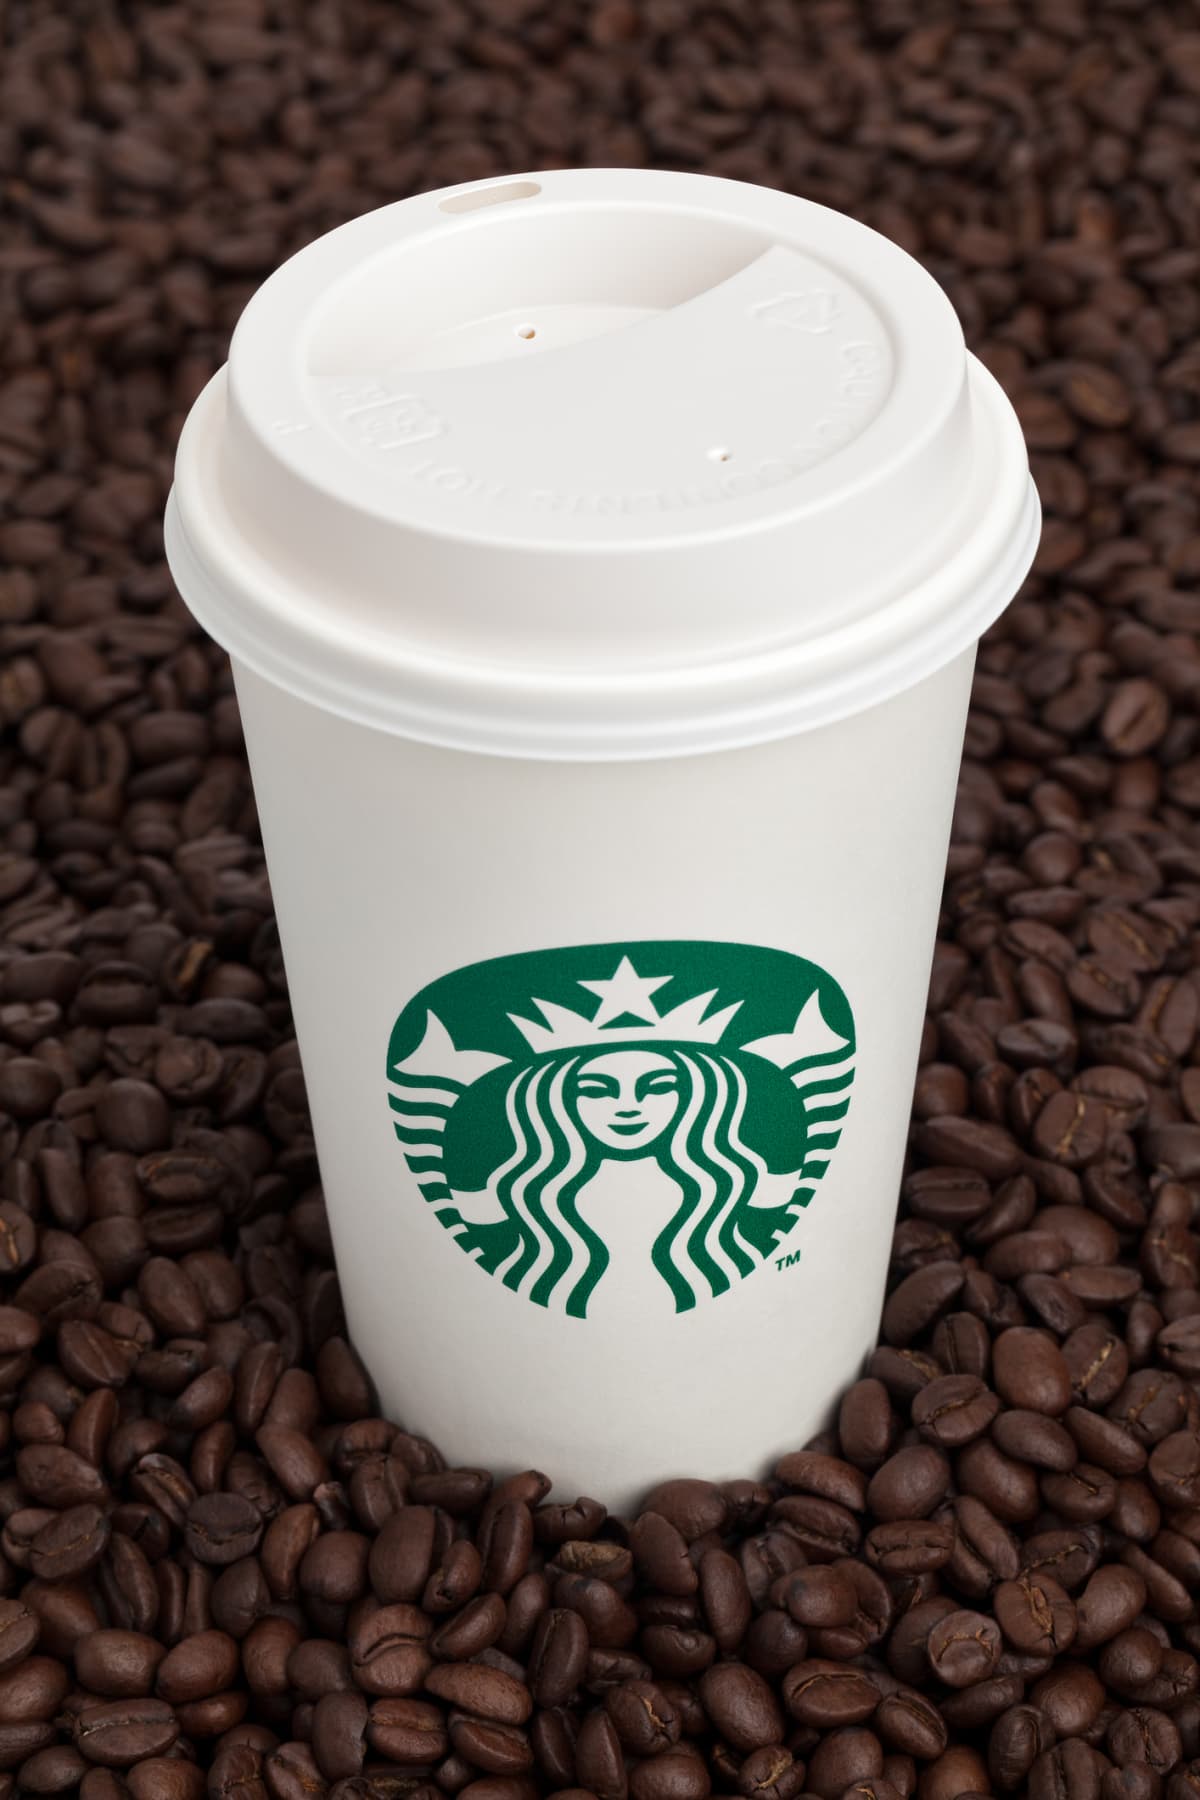 A white starbucks cup surrounded by arabica coffee beans